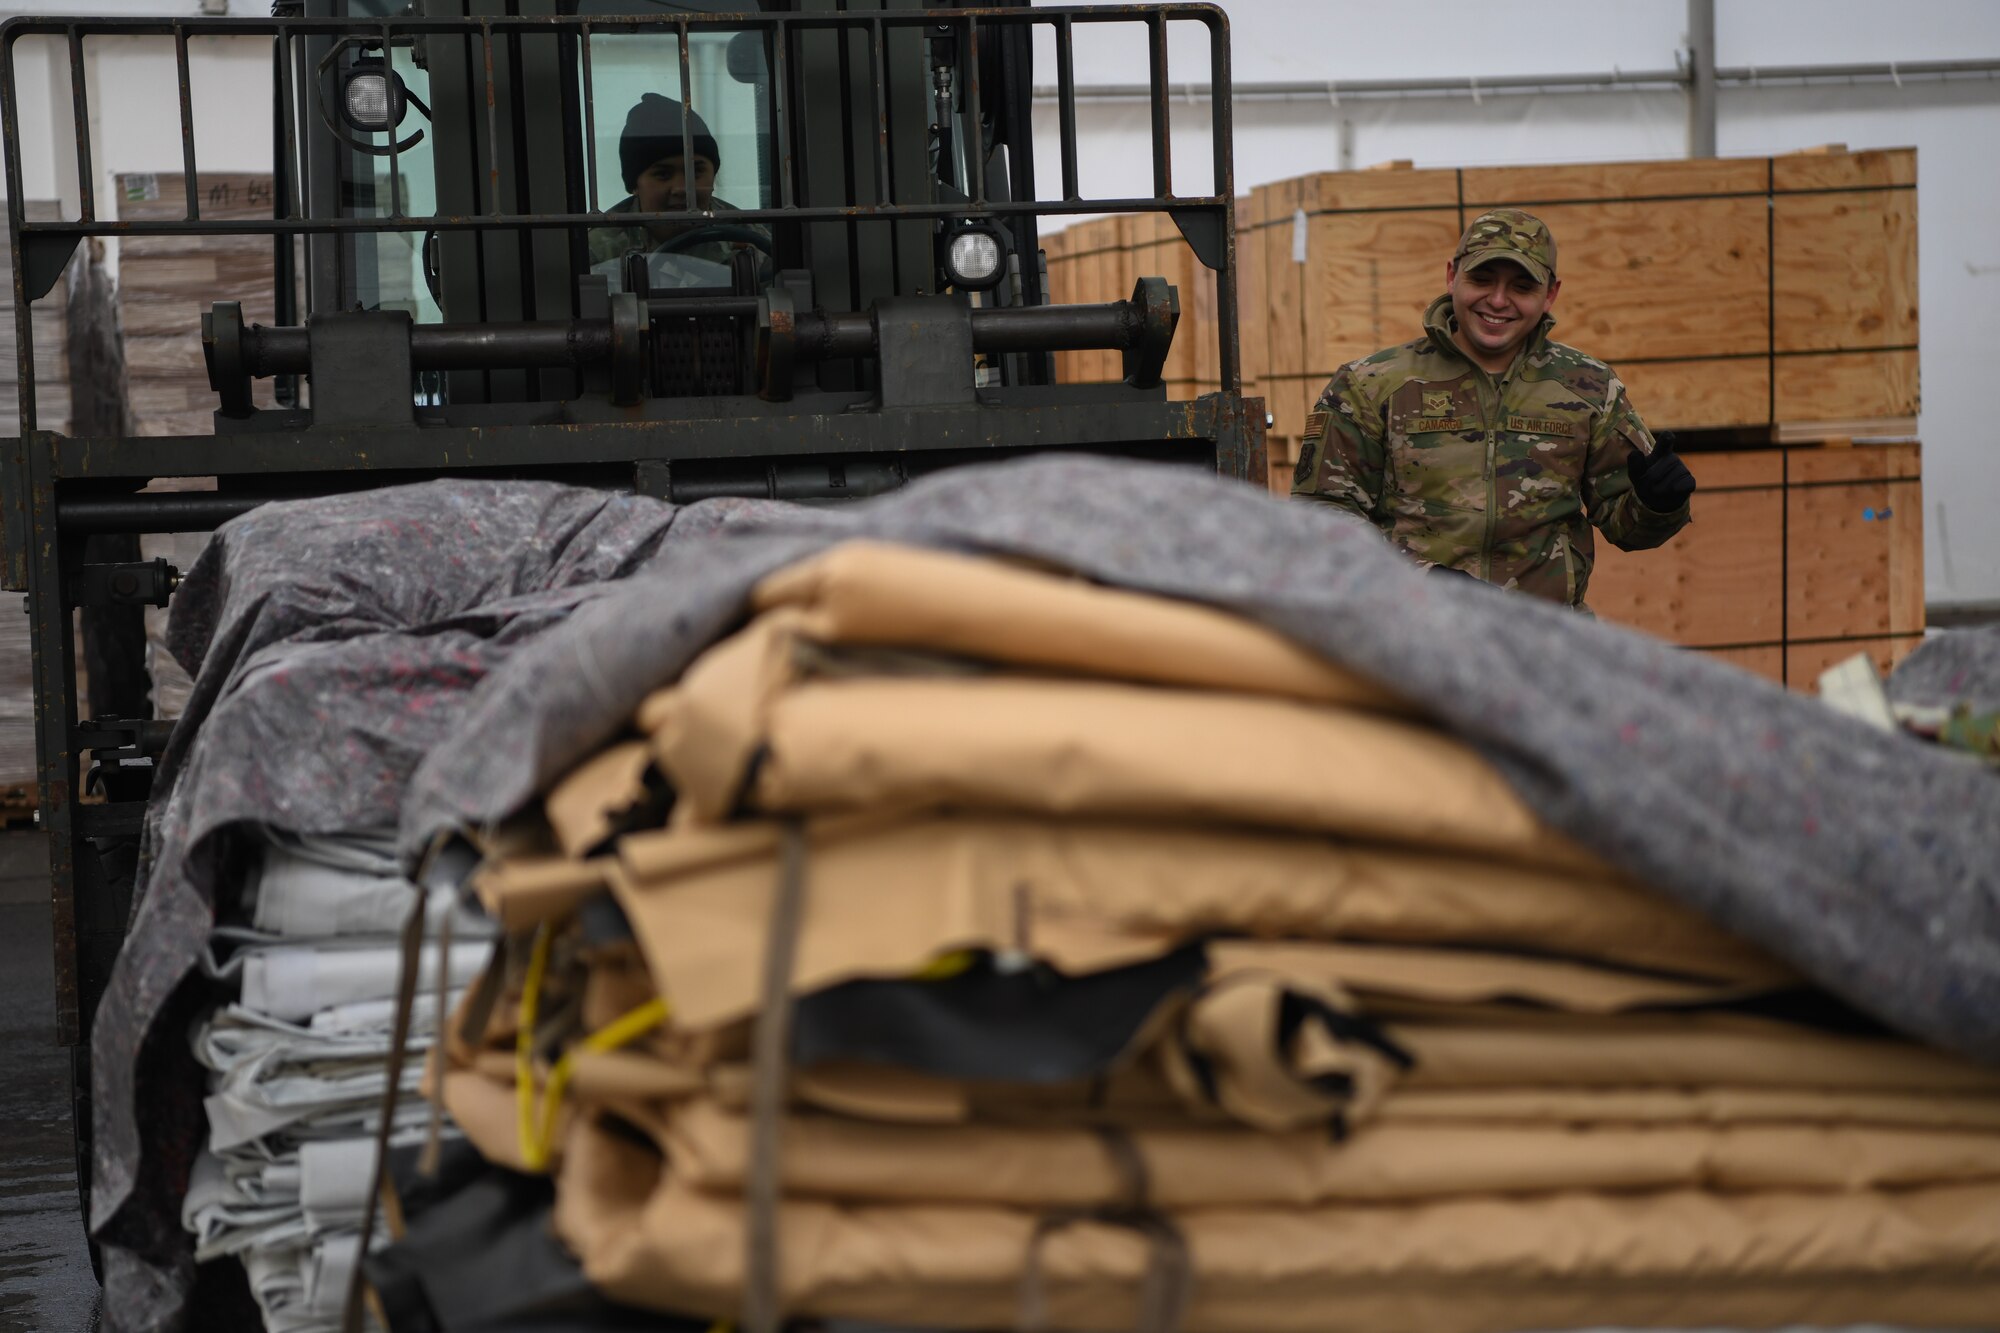 Senior Airman David Camargo, 435th Air Expeditionary Wing air transportation journeyman, right, spots U.S. Air Force Staff Sgt. Louise Thornton, 435th AEW air transportation craftsman, left, as she drives a 10K Standard Forklift carrying tent skins and liners for Nigerien Air Base 101 and 201 at Ramstein Air Base, Germany, Jan 21, 2022. During a flood, U.S. and allied service member tents were damaged, which required approximately 15 new replacements. (U.S. Air Force photo by Senior Airman Ericka A. Woolever)